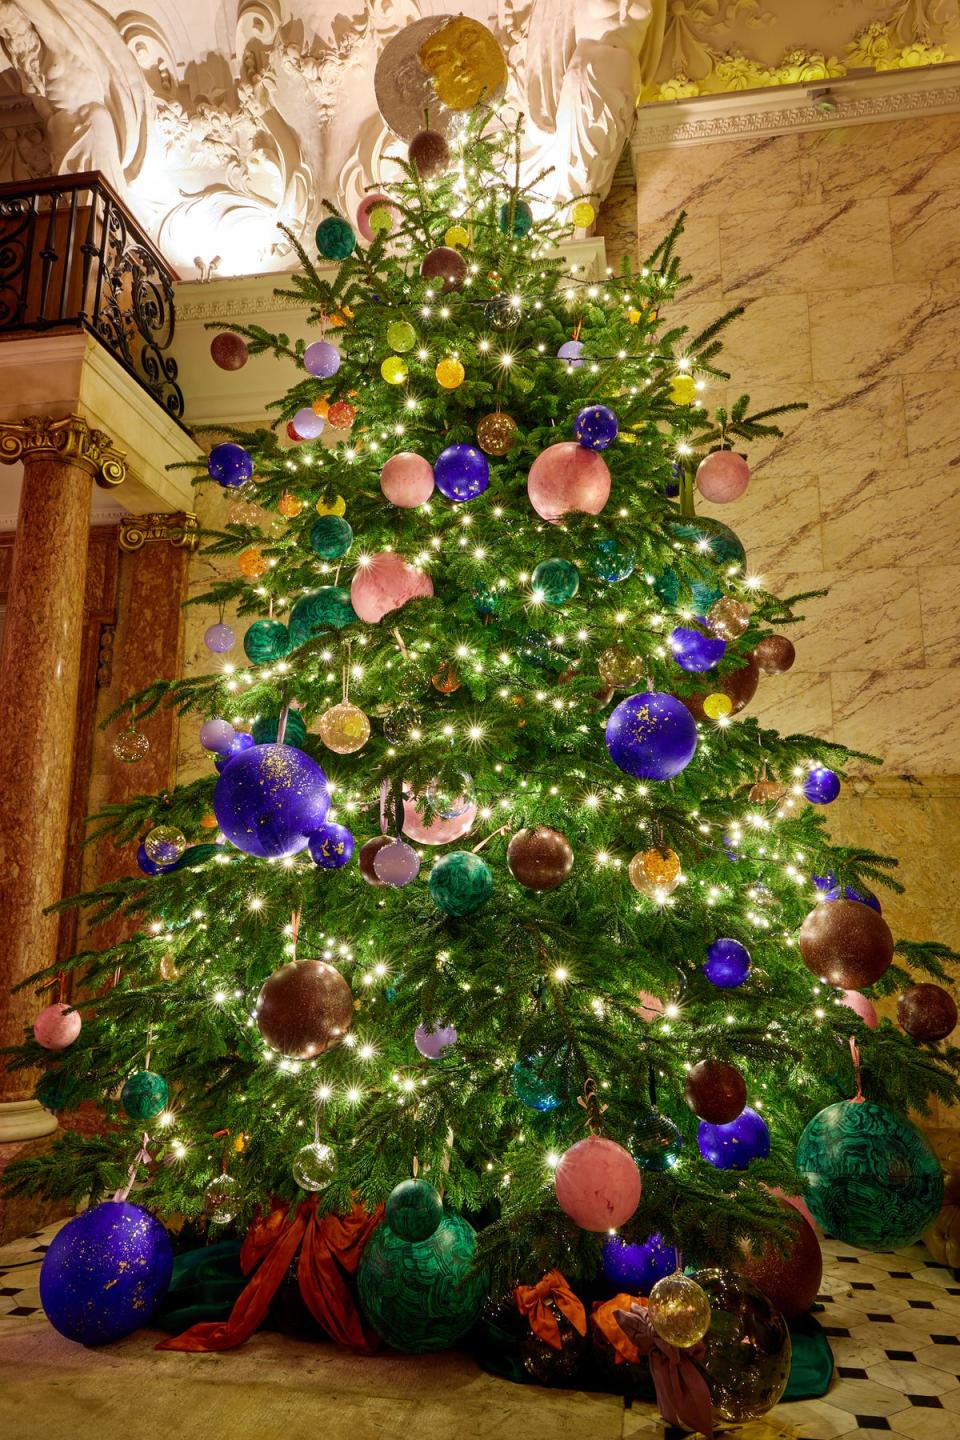 Campbell-Rey have decorated The Edition hotel's Christmas tree this year (The Edition)